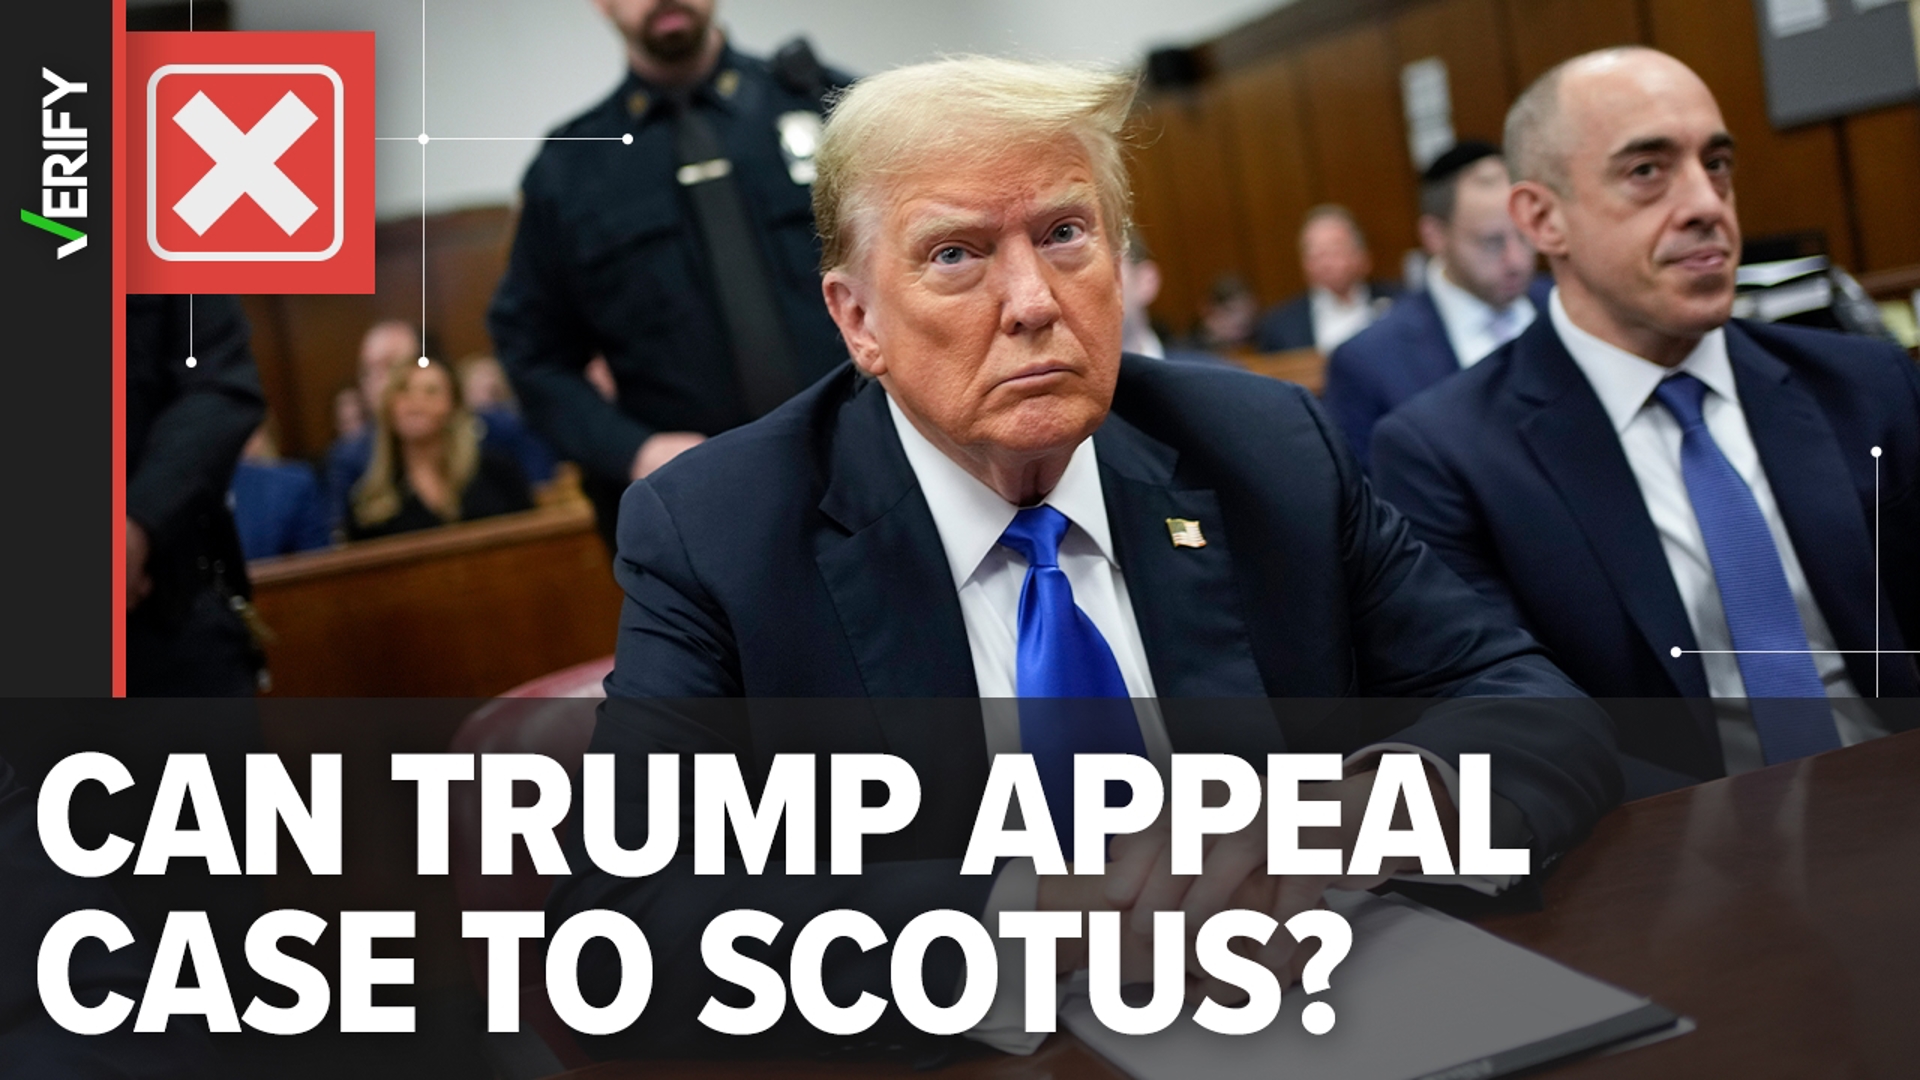 Trump’s hush money case must go through the New York appellate court system before it could reach the U.S. Supreme Court.